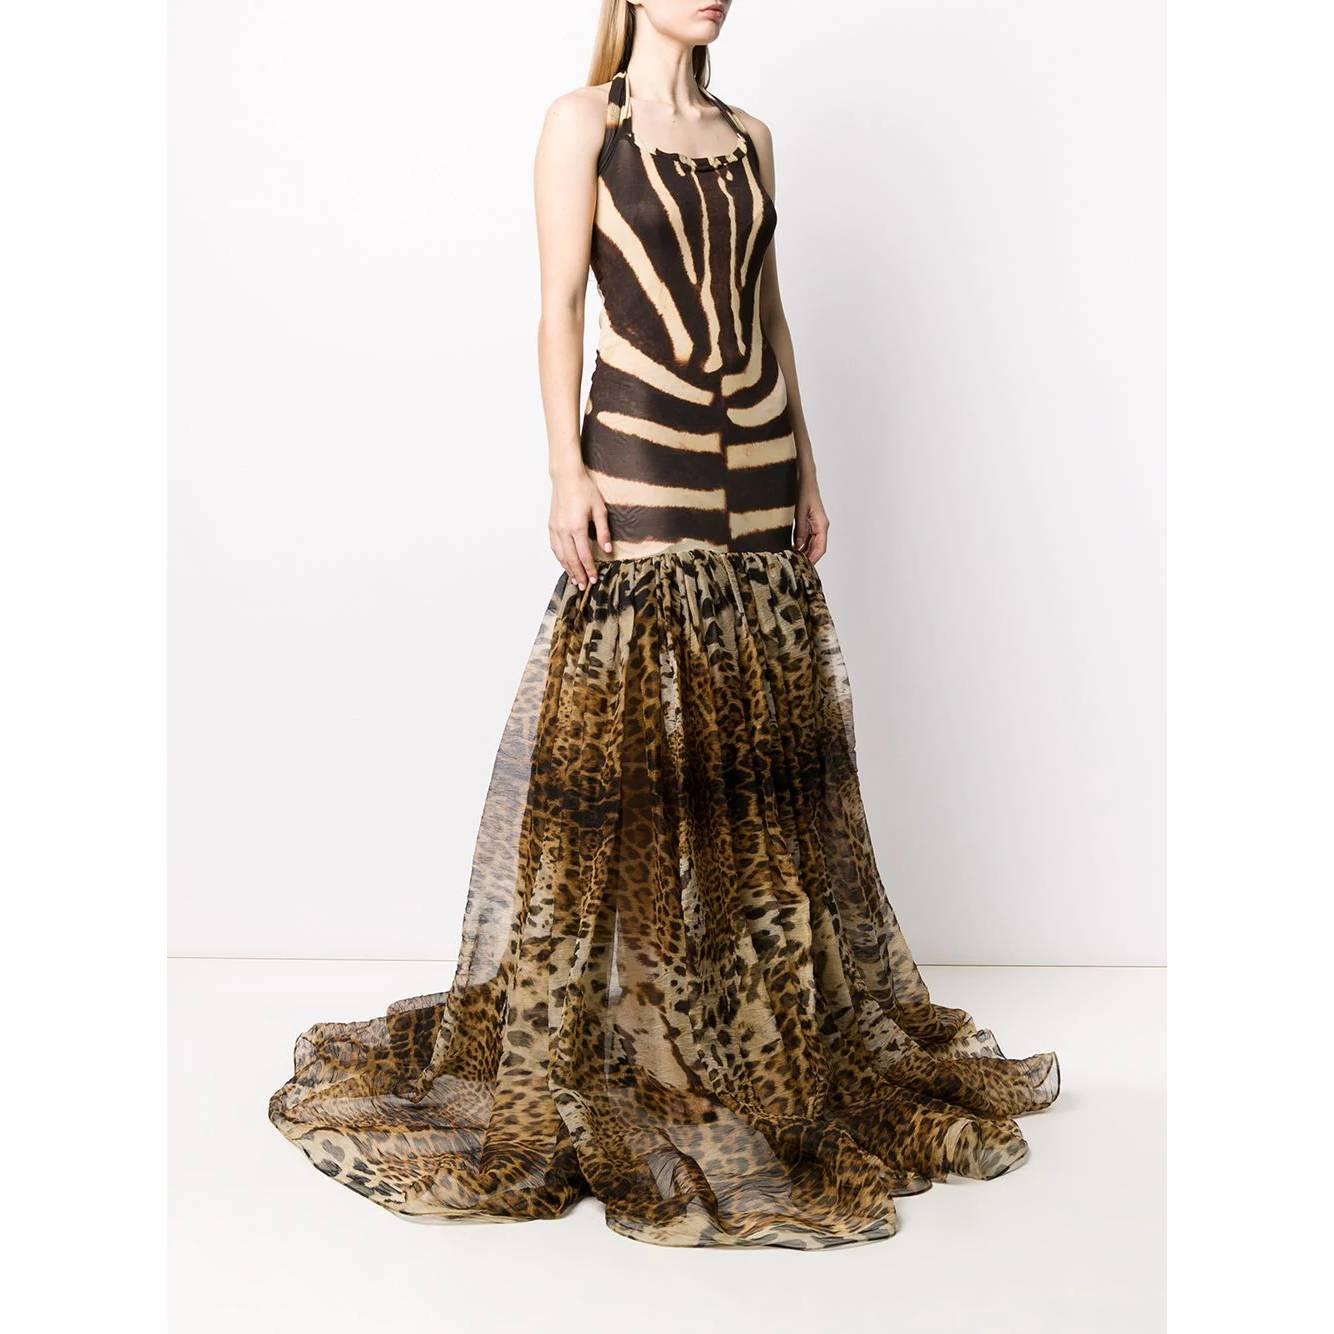 Gianfranco Ferré beige and brown animal print stretch fabric evening dress. Mermaid design with open back and tulle appliqué. Back zip closure.

Size: 40 IT  

Flat measurements  
Height: 200 cm  
Bust: 28 cm  
Hips: 37 cm

Product code: